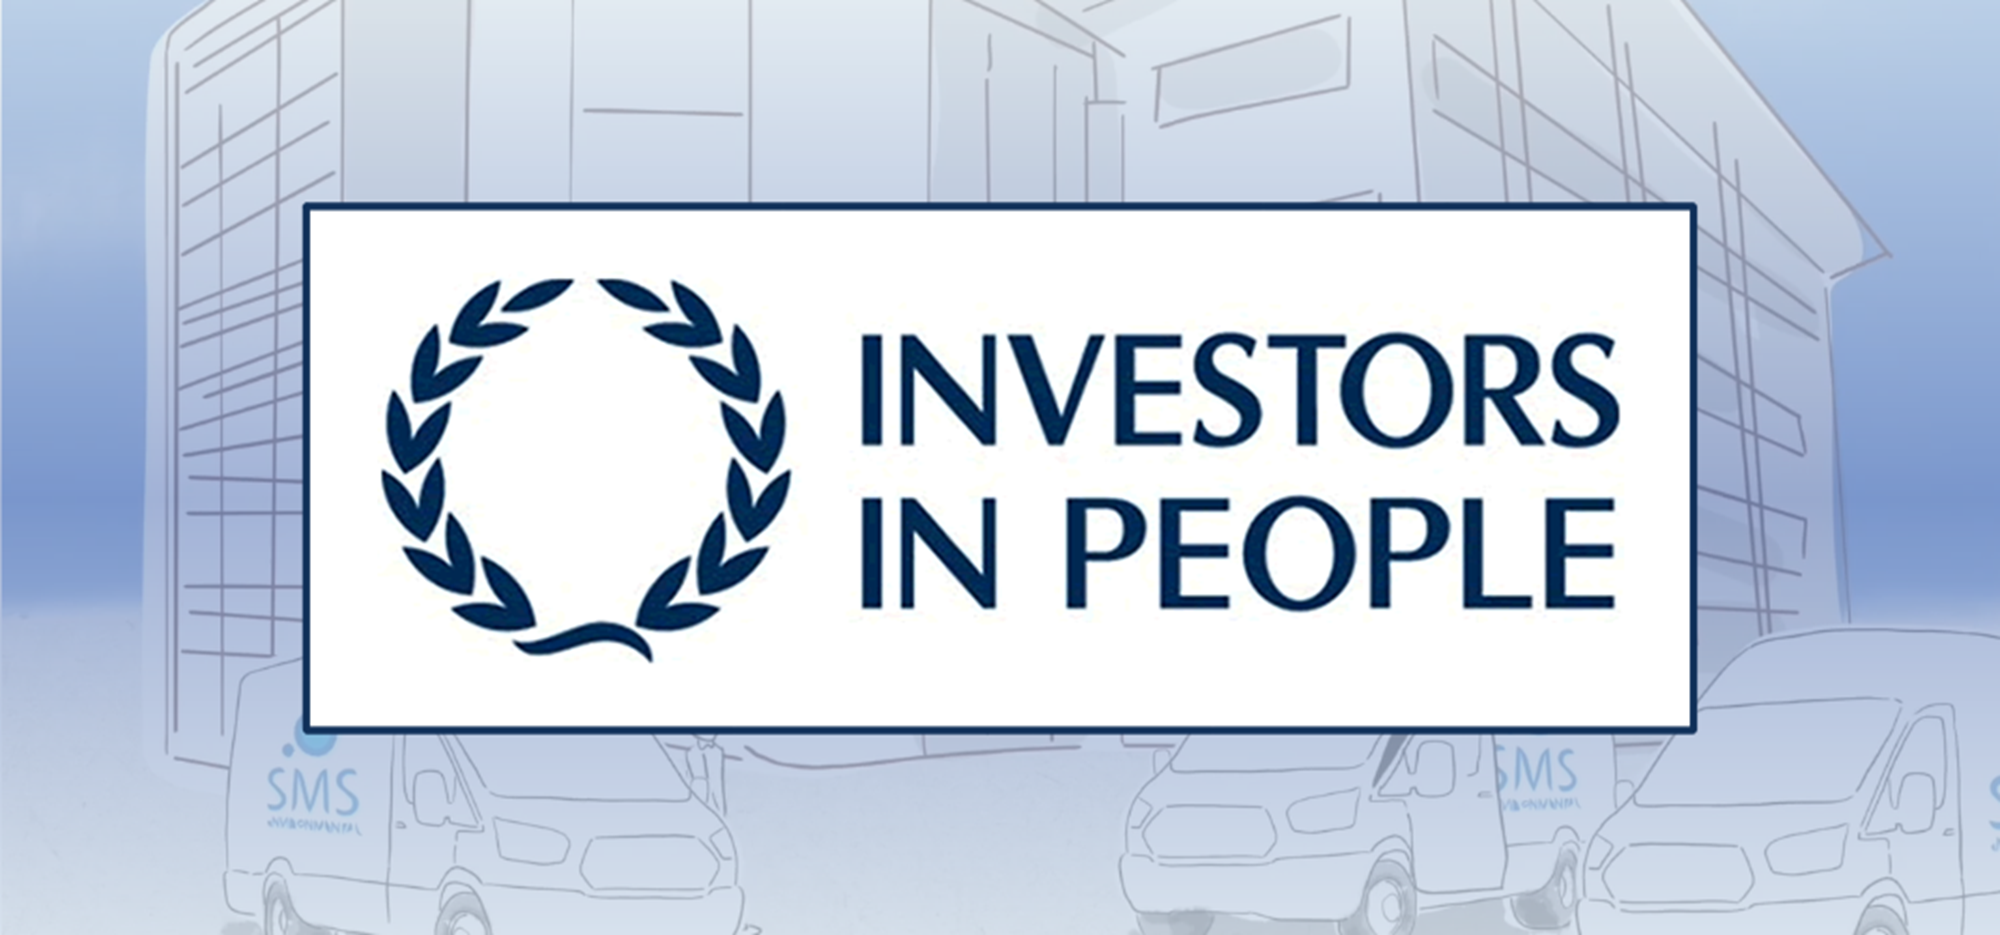 SMS Environmental, Investors in People accredited